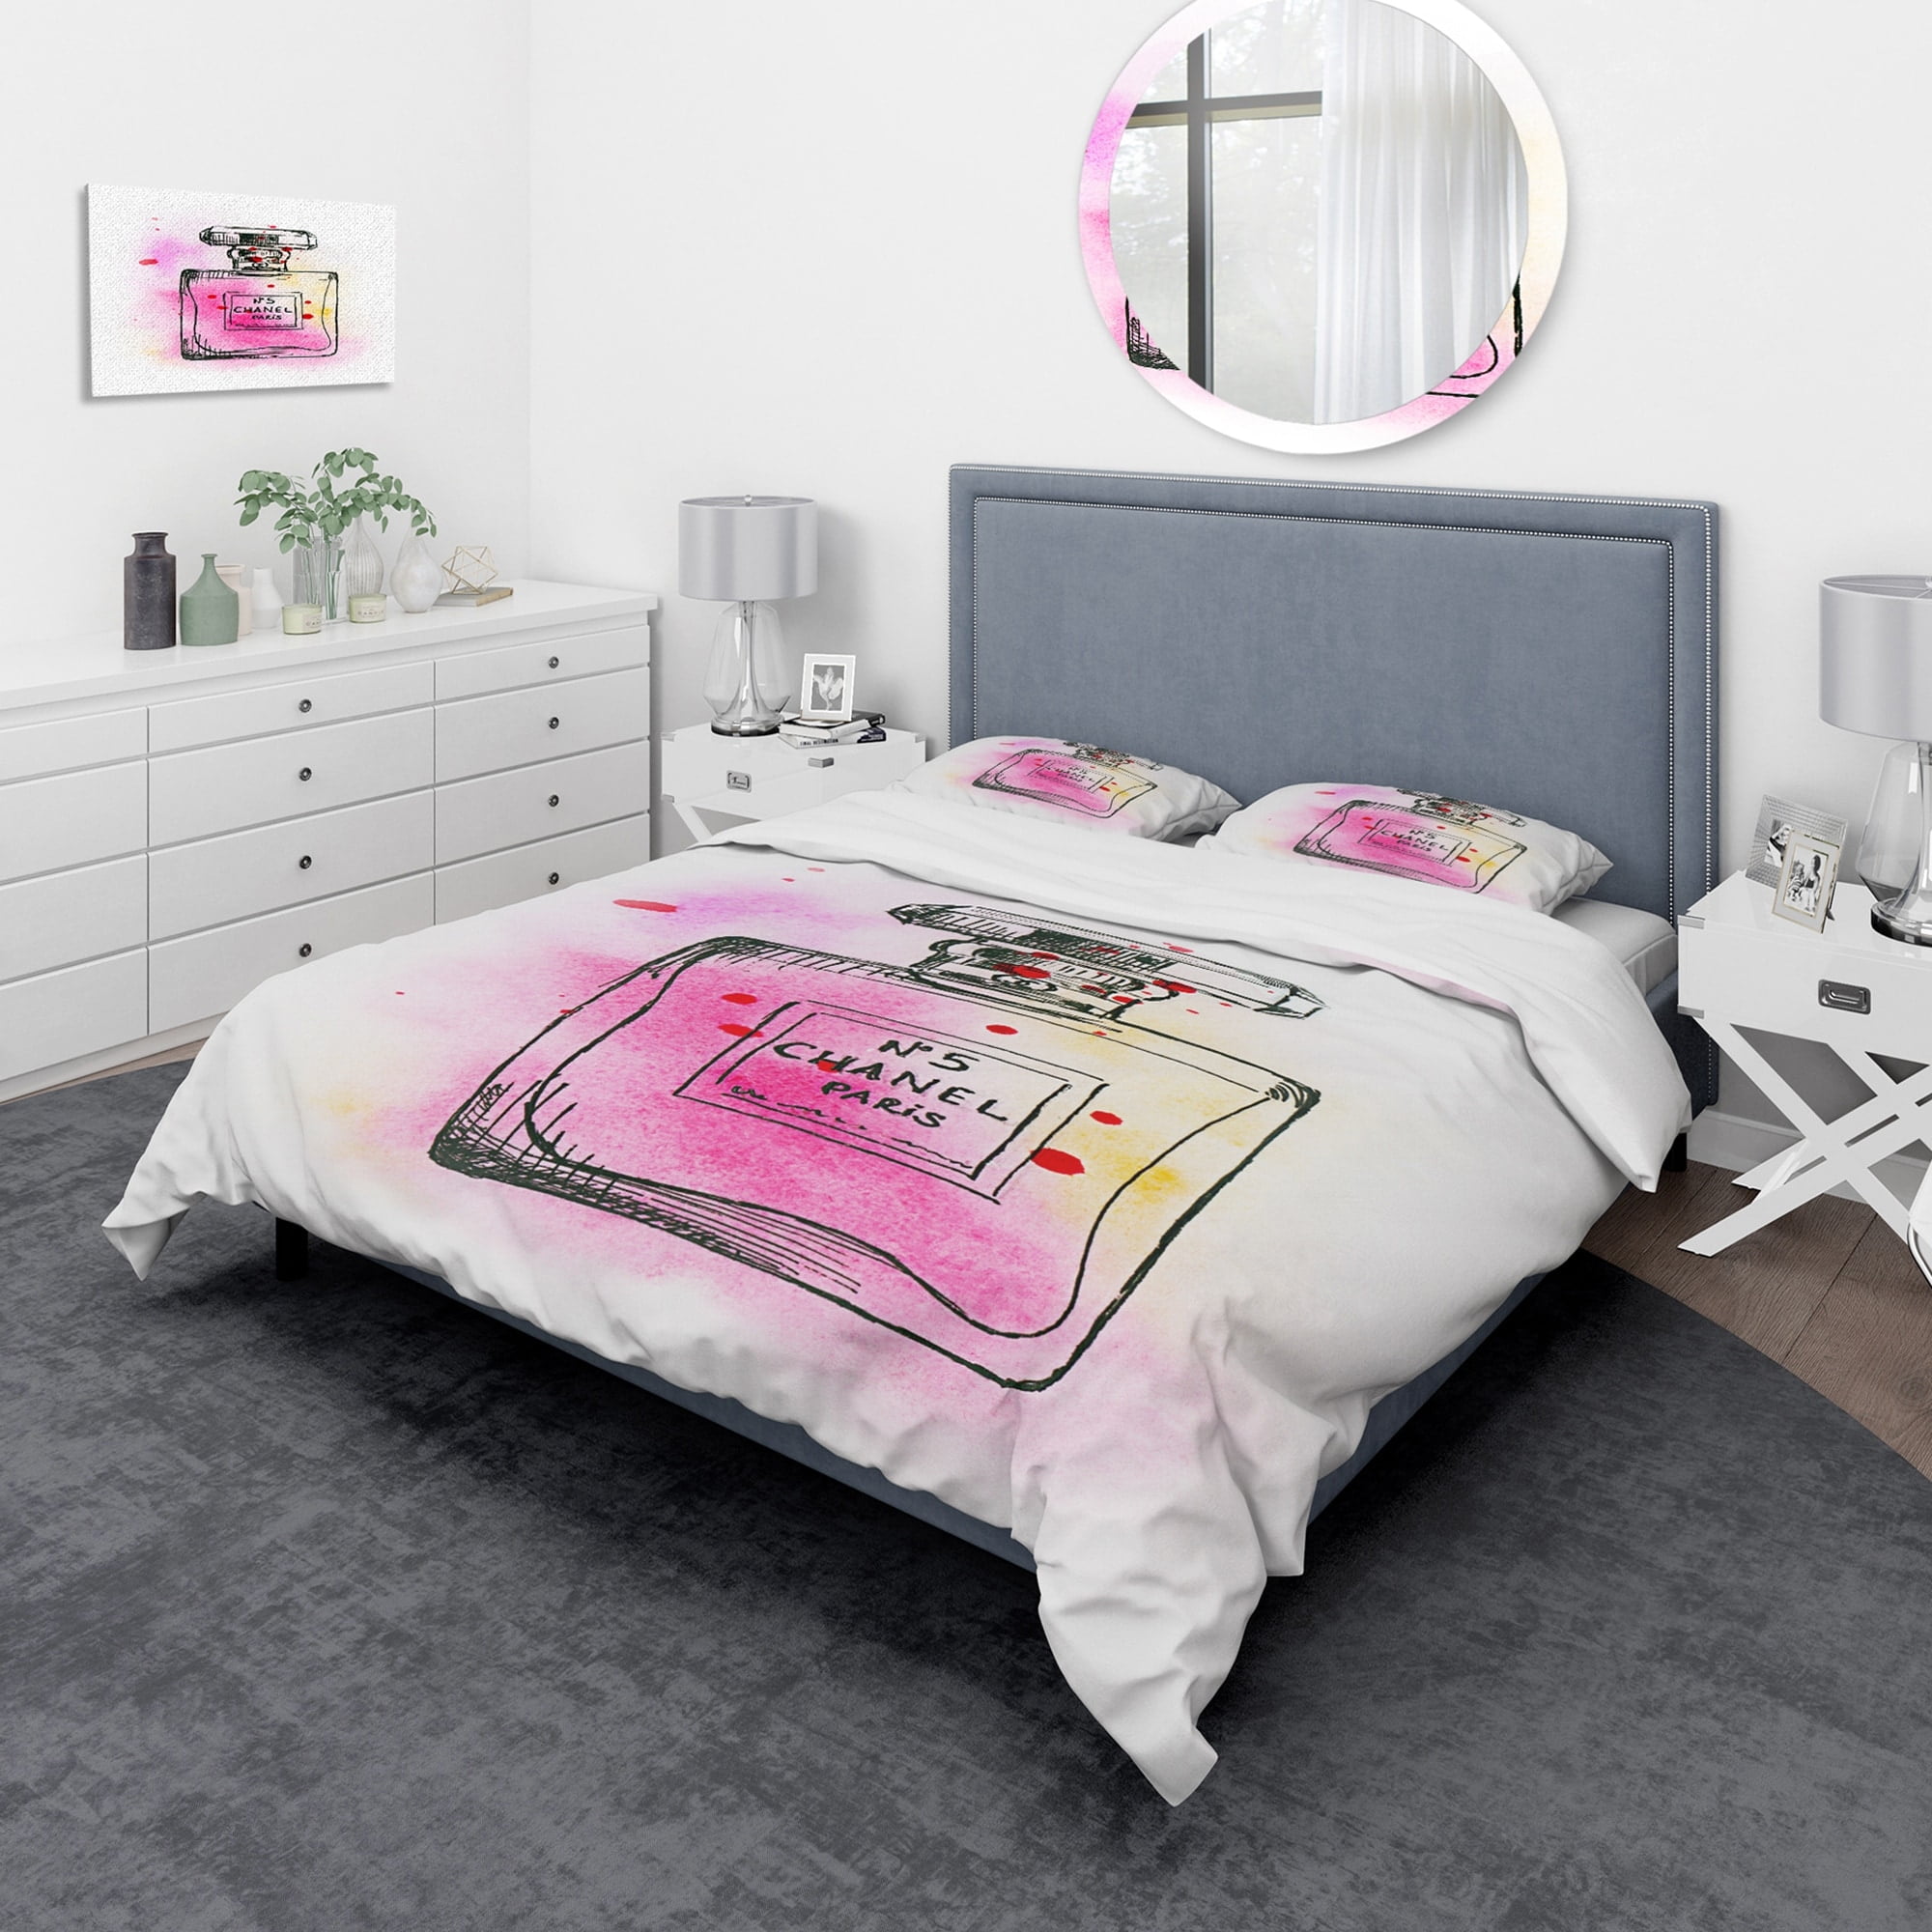 Pin by Bonolo on Cute acrylic nails  Chanel bedding, Chanel inspired room,  Bedroom bedding sets